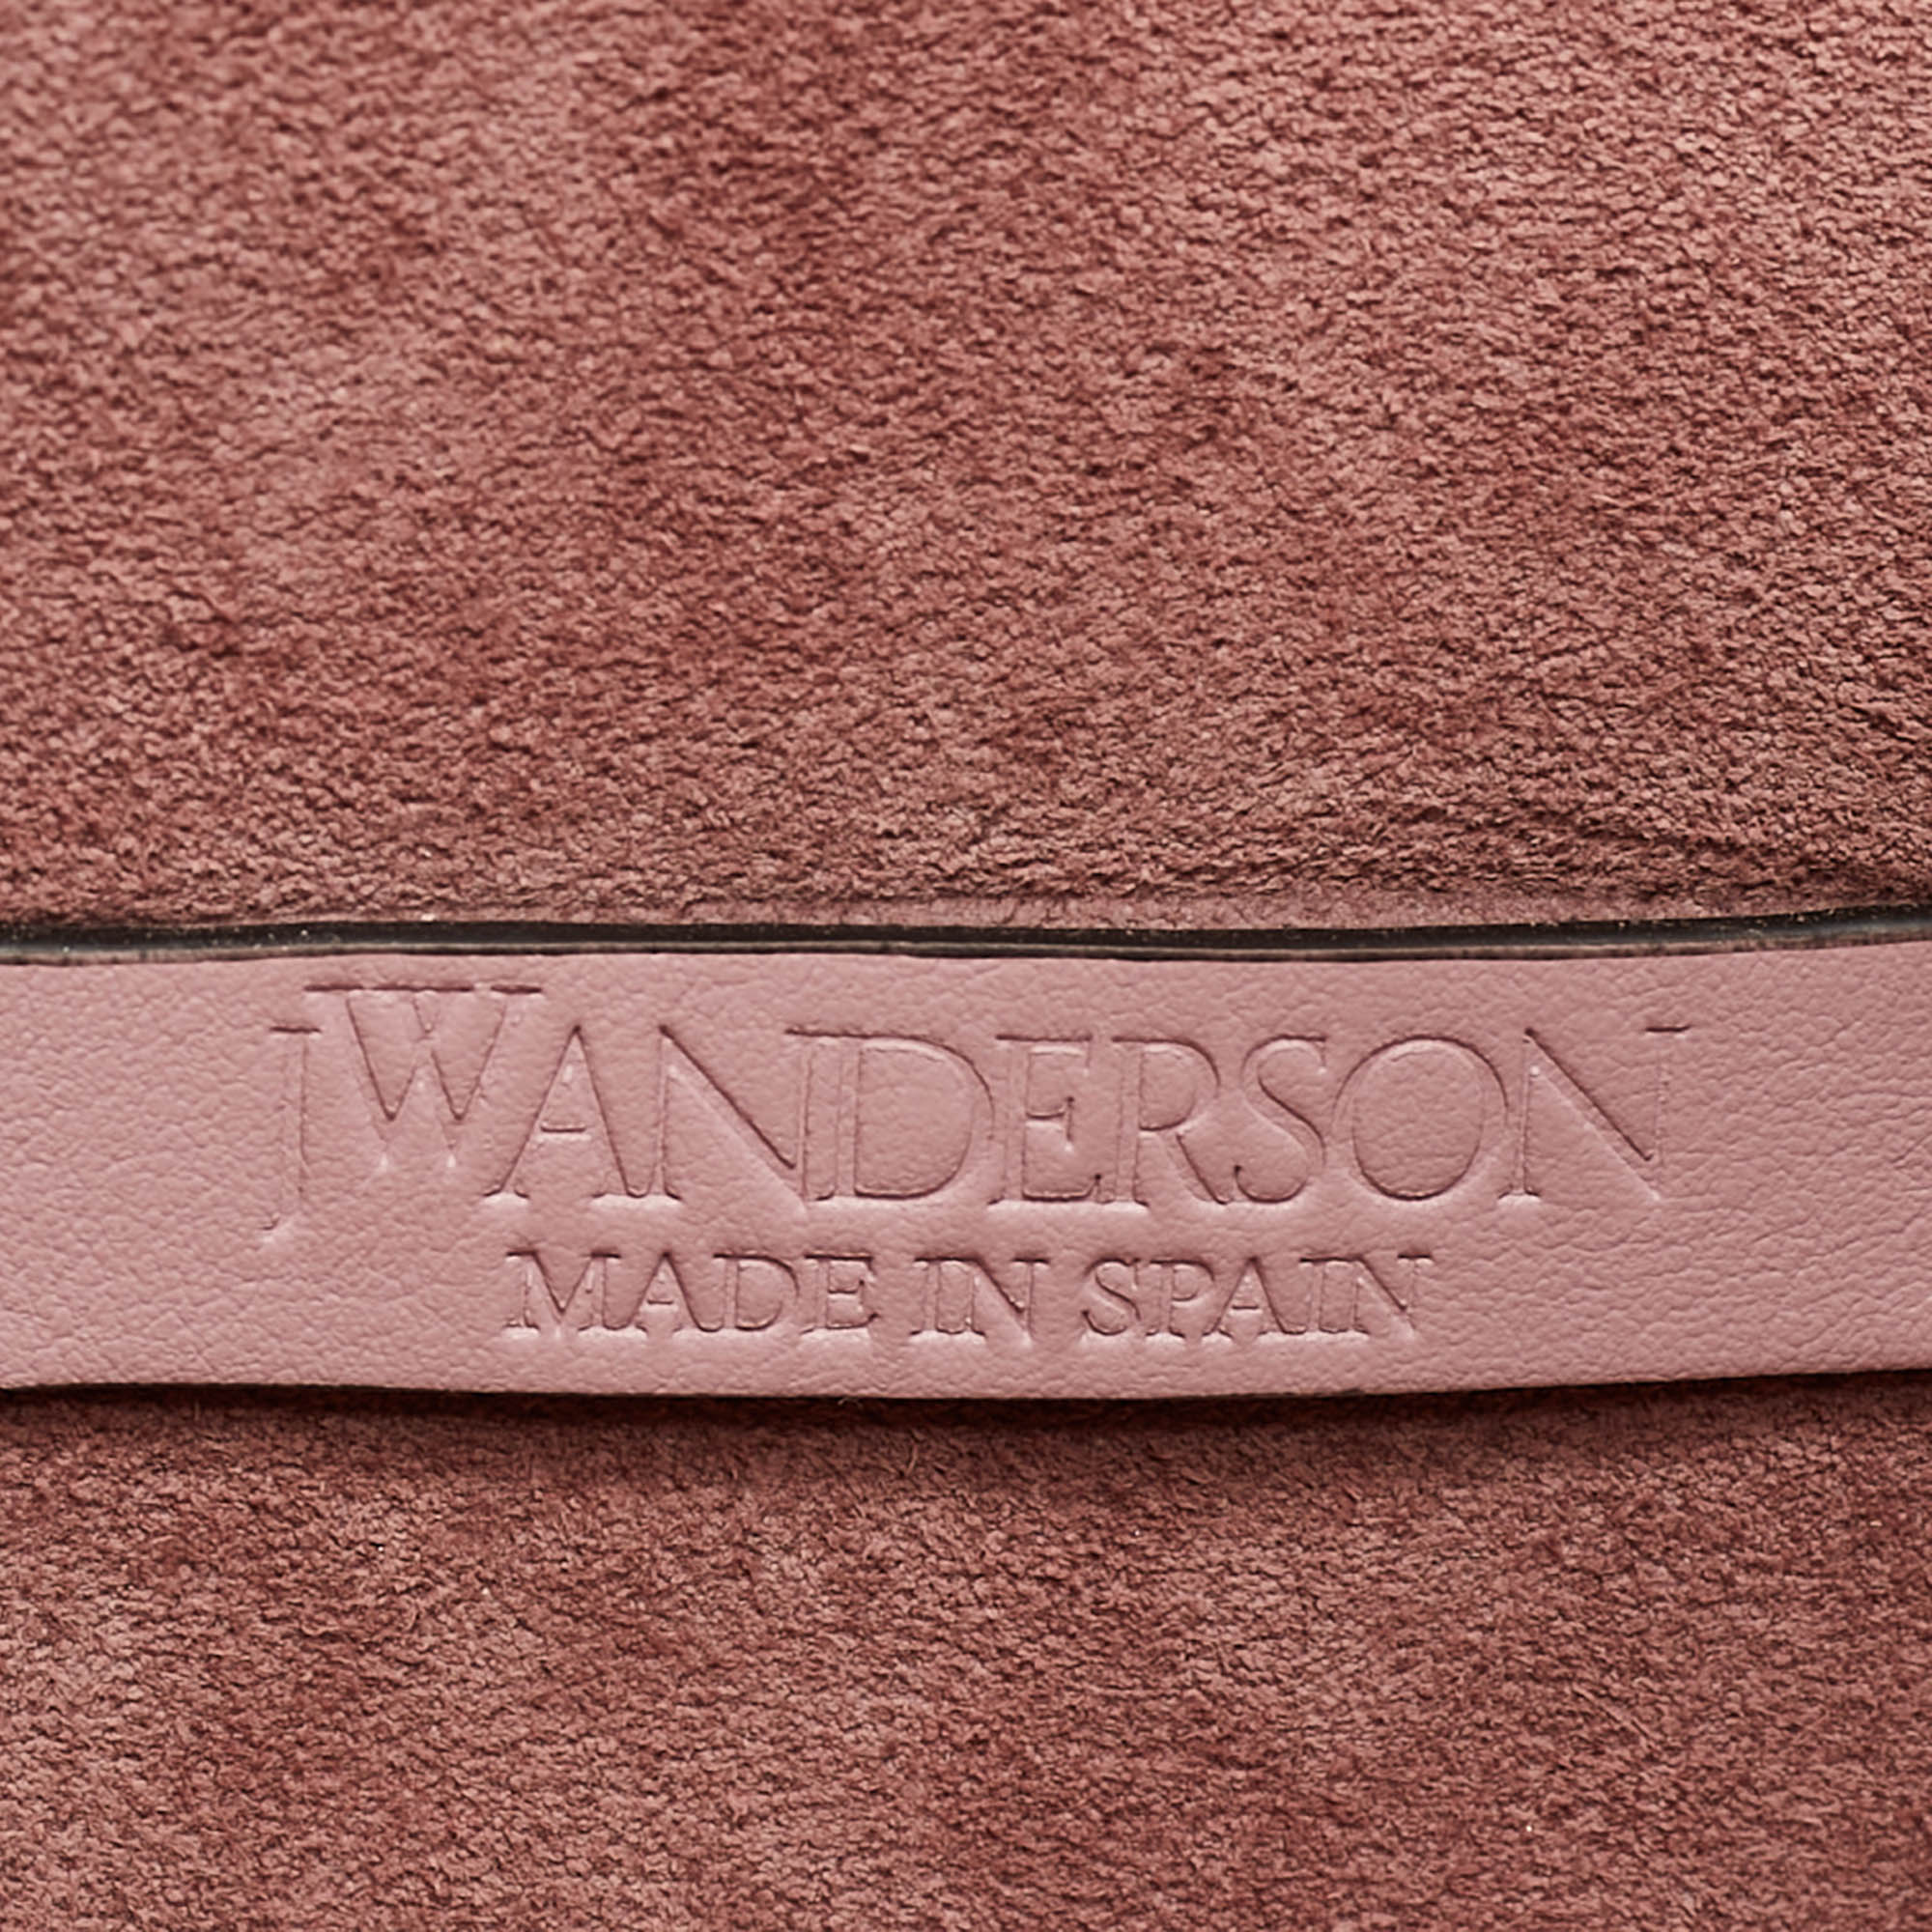 J.W.Anderson Pink Leather Chain Hobo